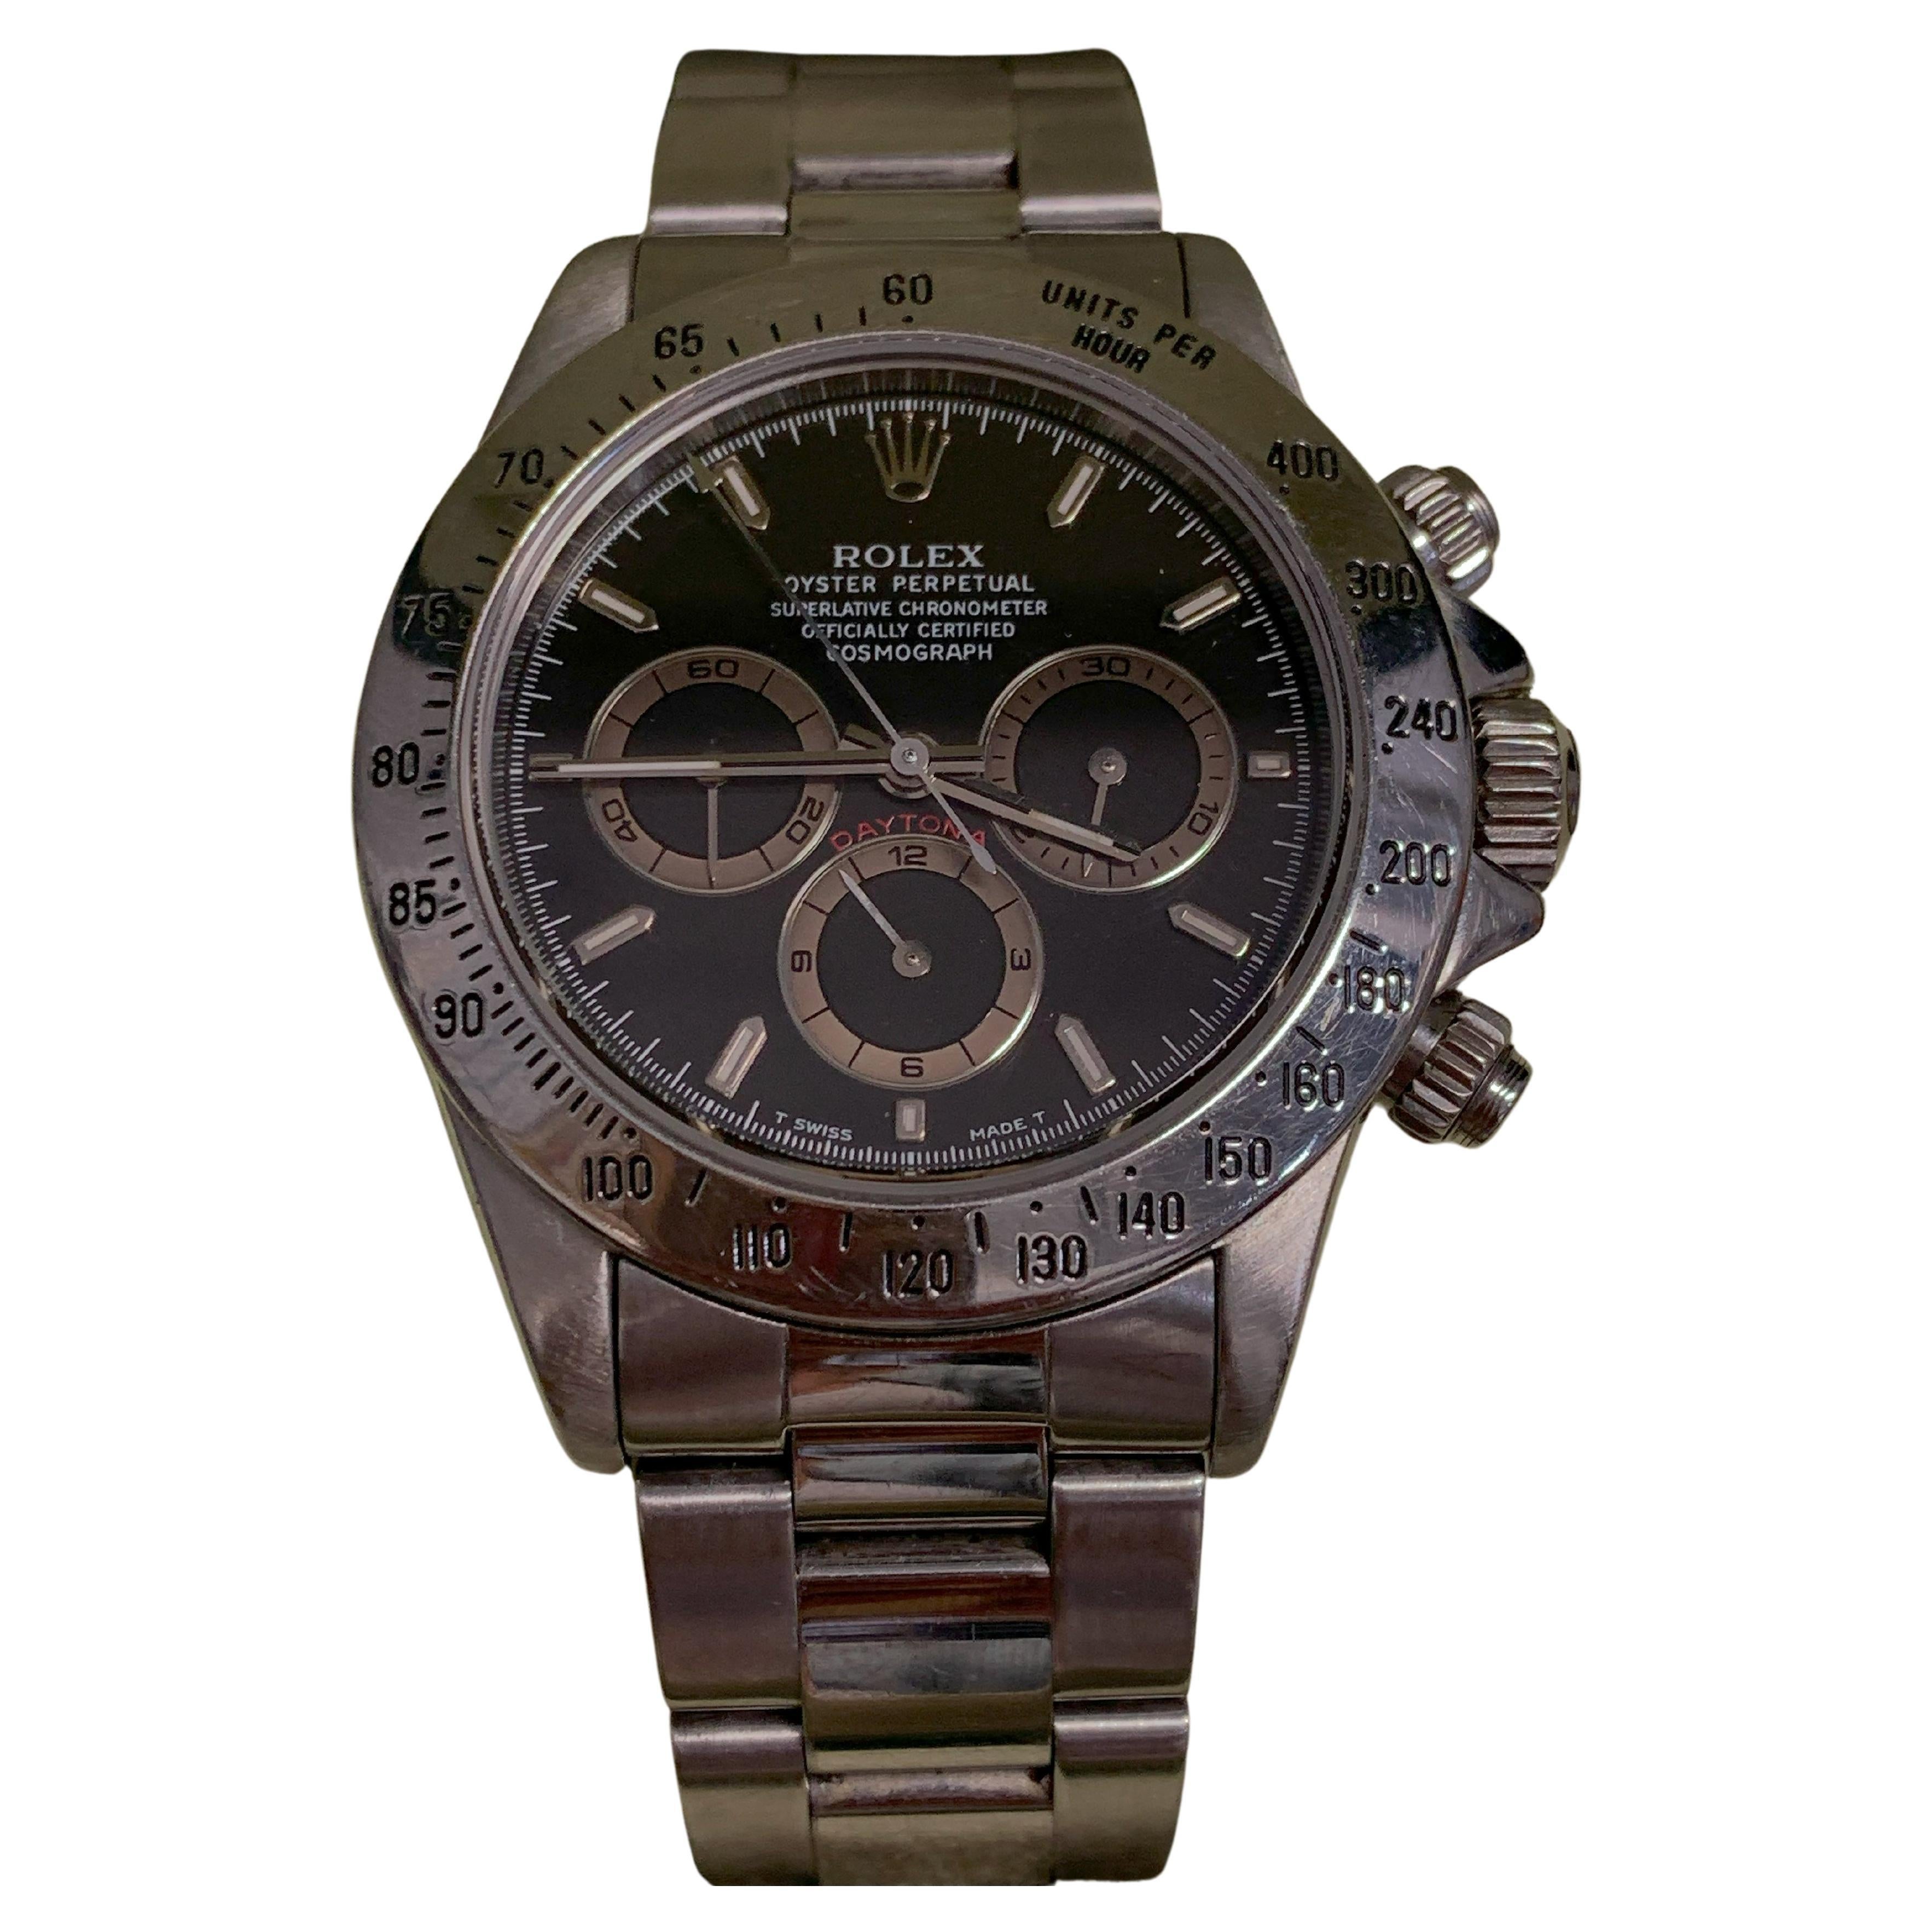 Rolex Daytona Cosmograph Watch with Patrizzi Dial & Zenith Movement For Sale